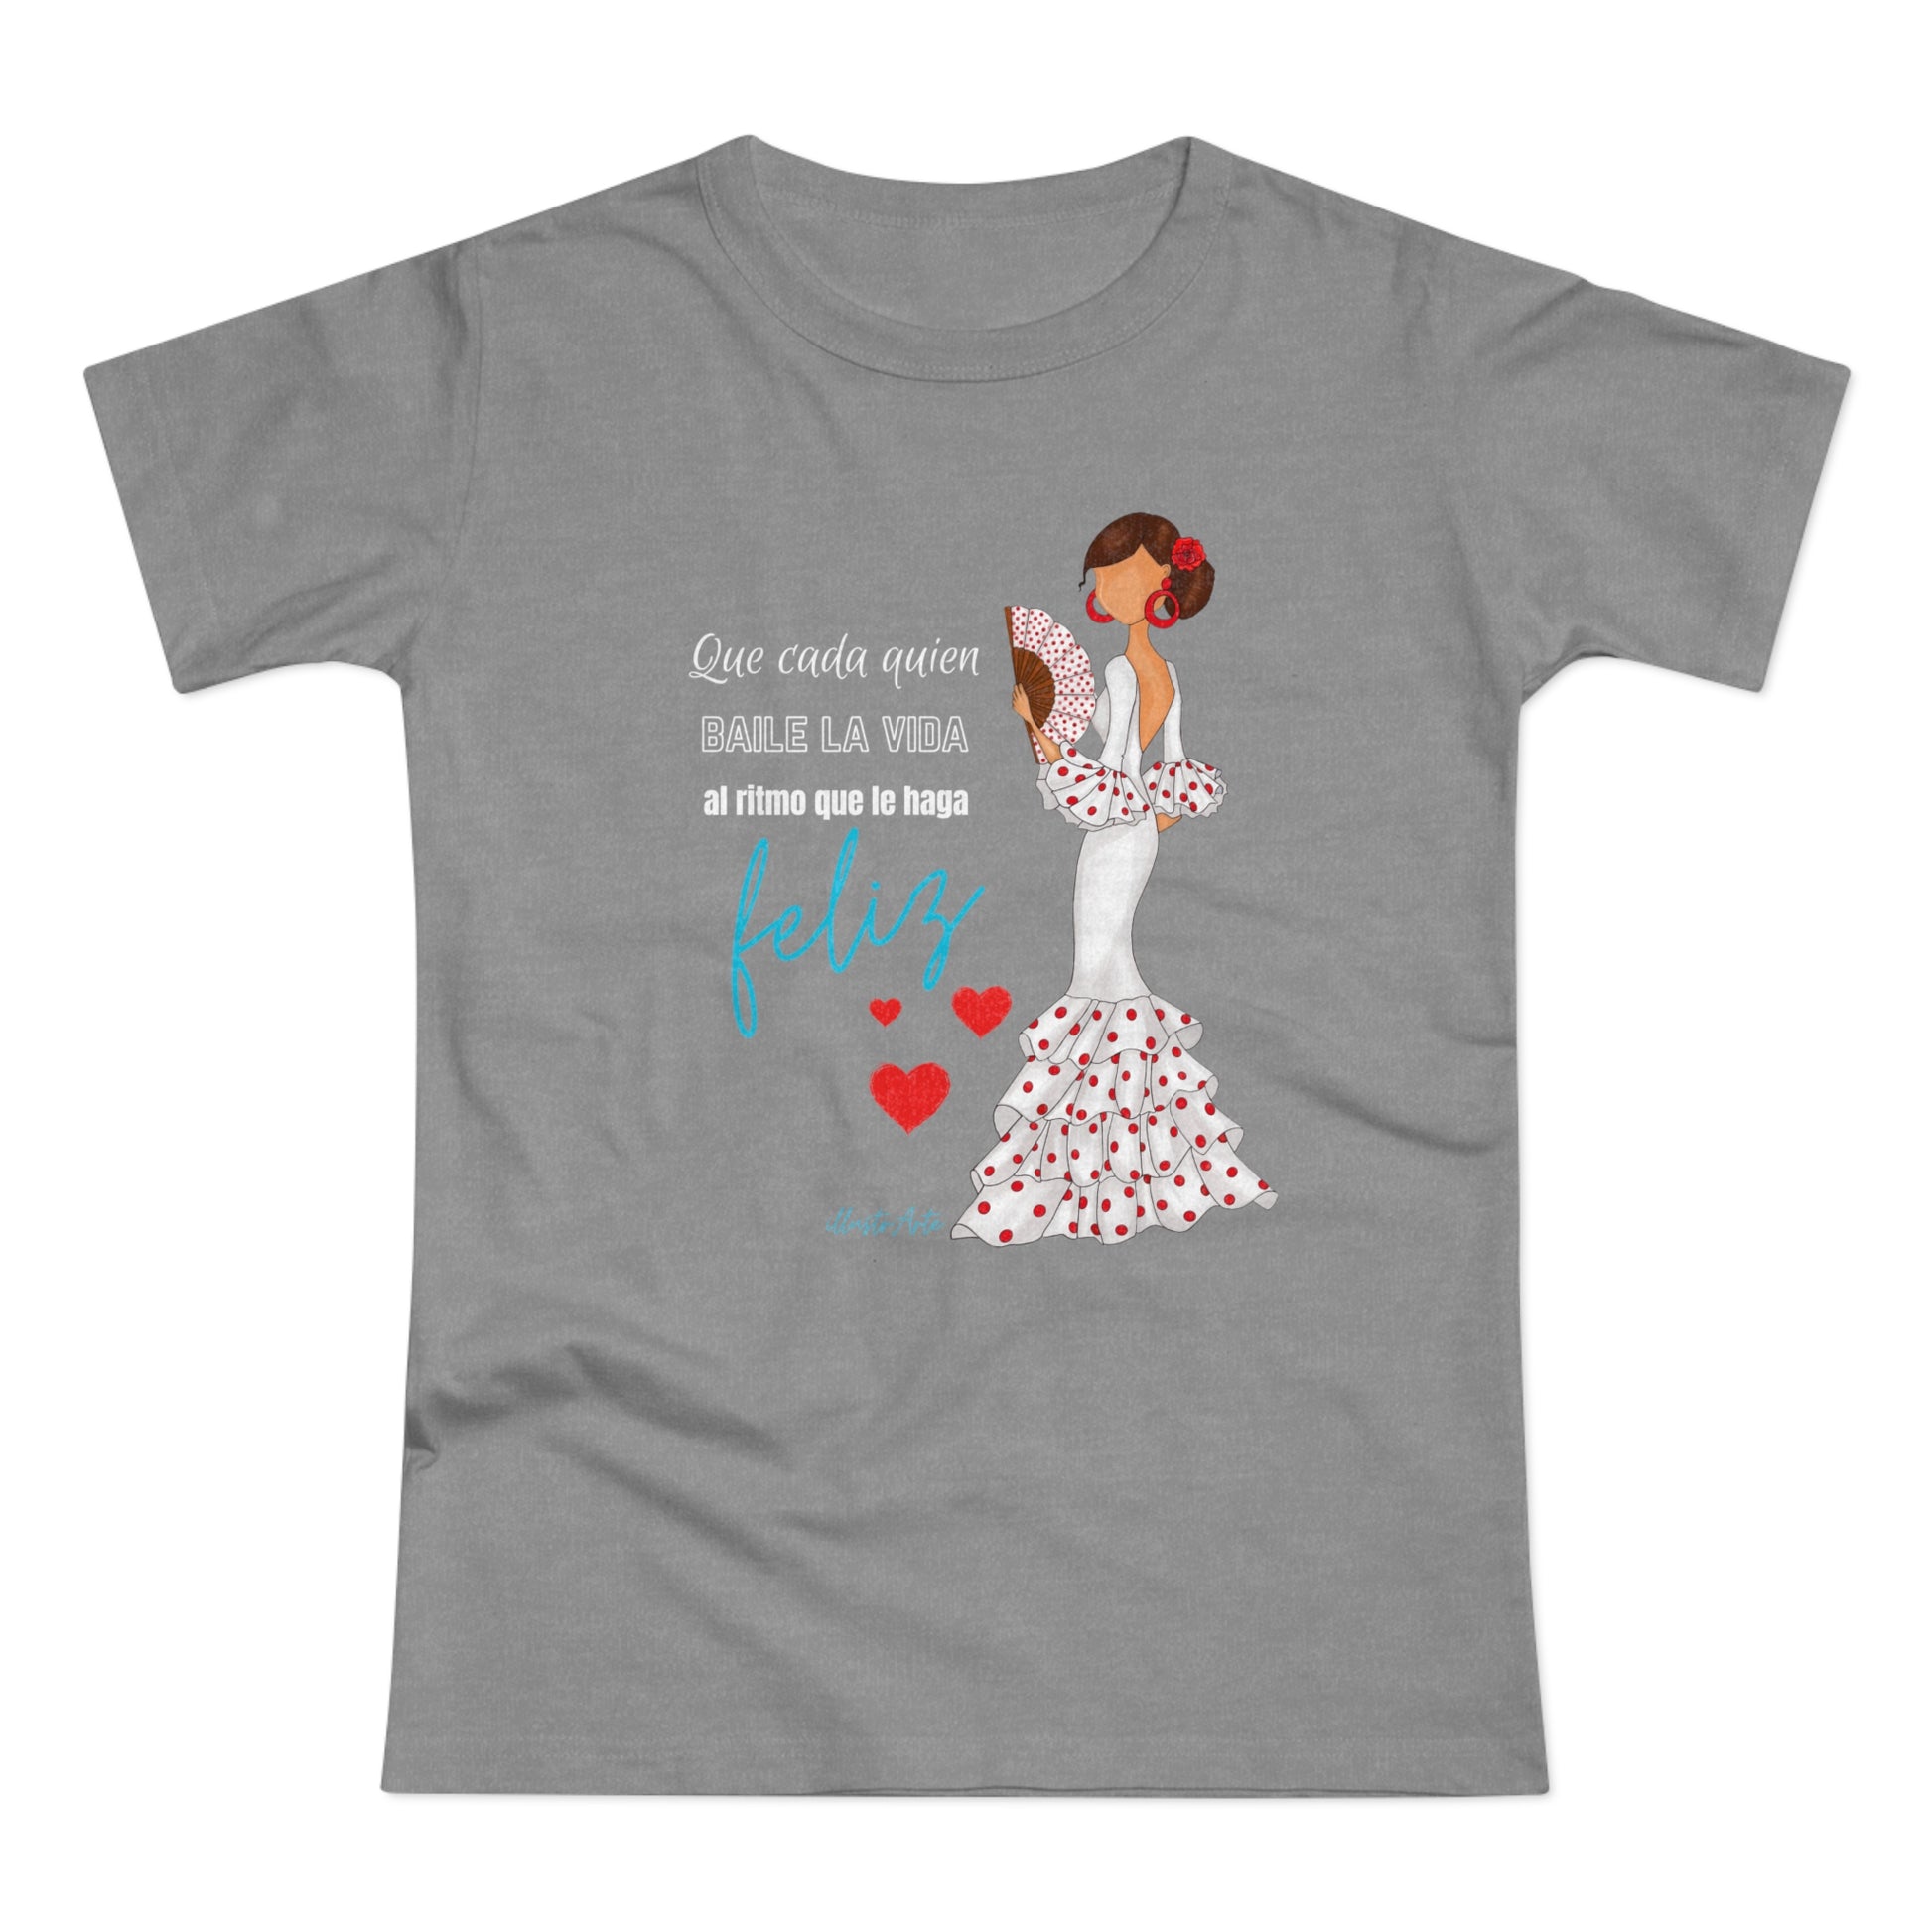 a women's t - shirt with a picture of a woman in a dress